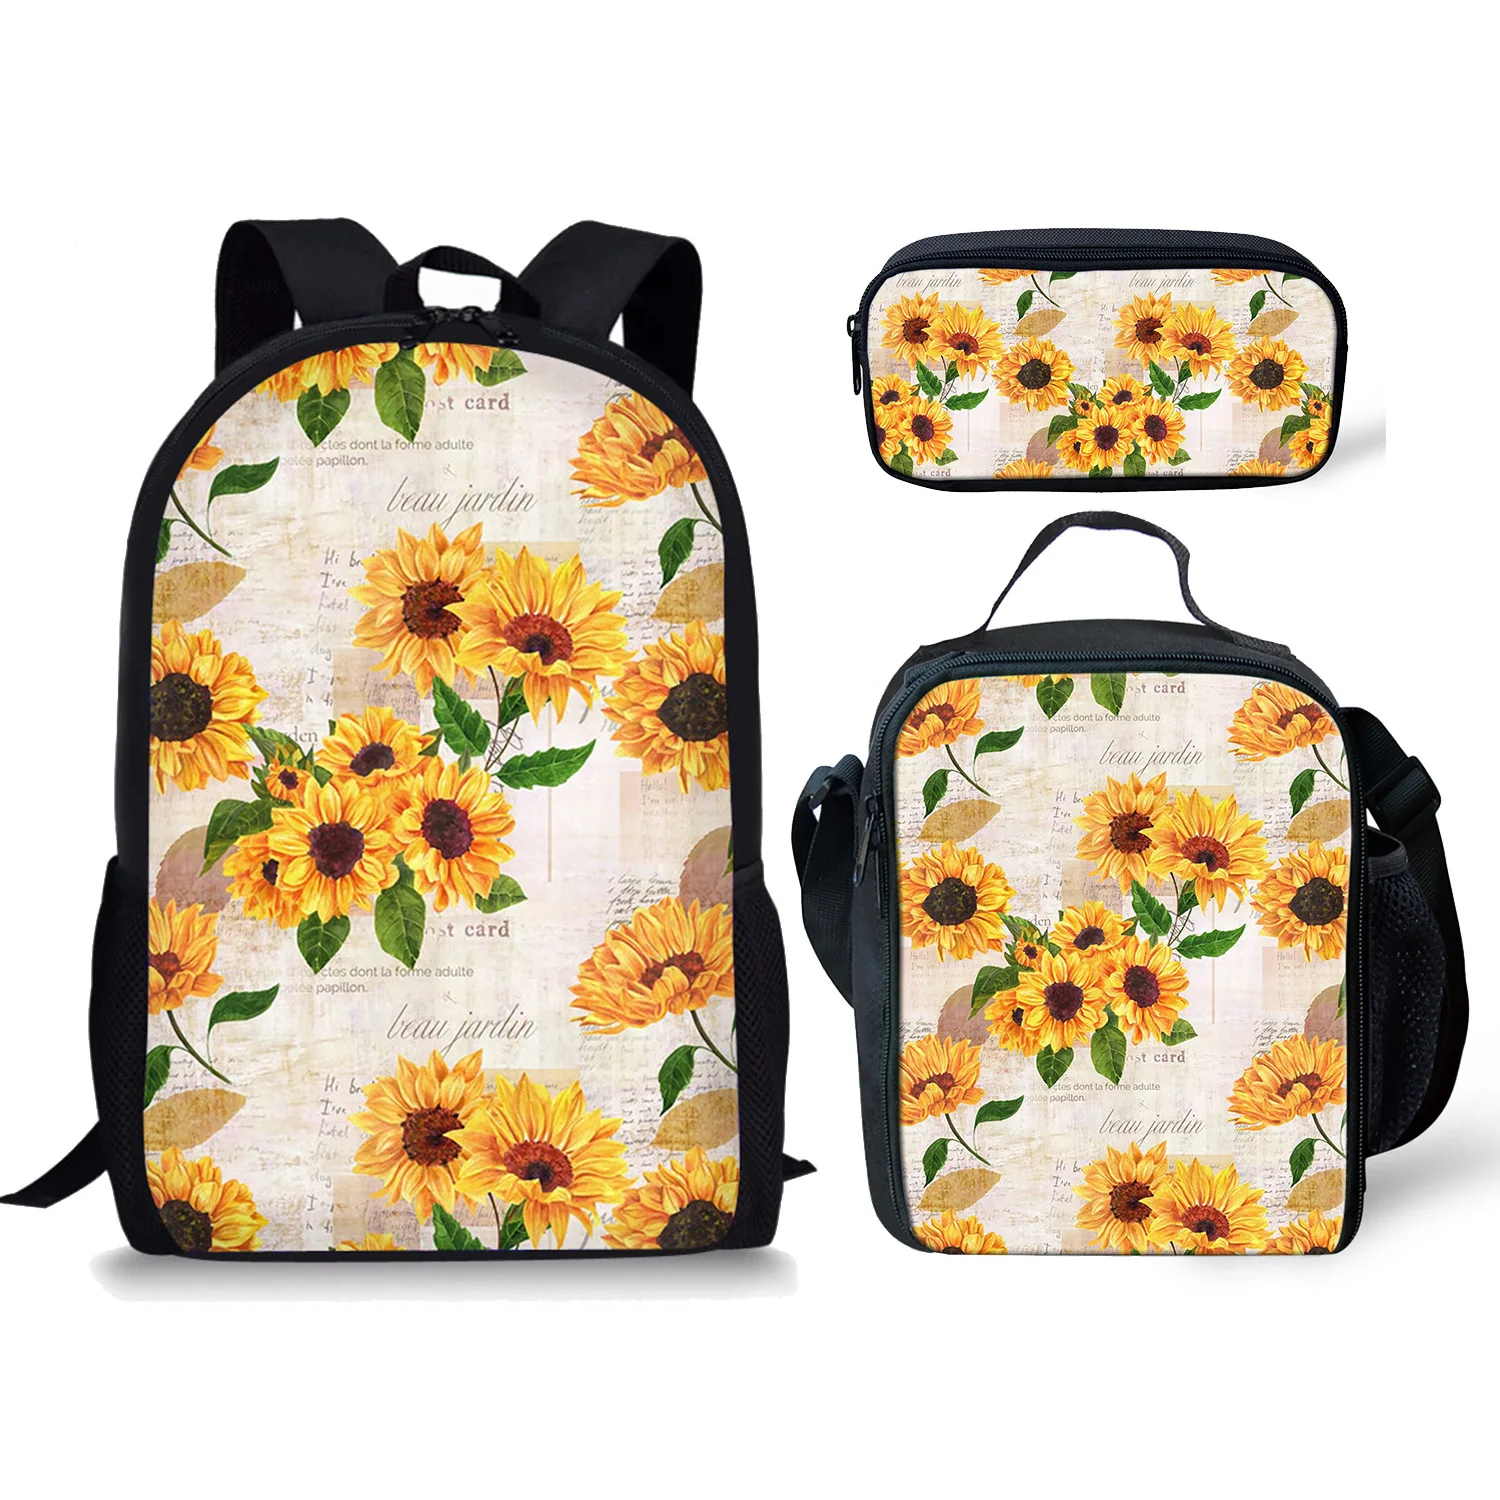 

Sunflower Pattern Girls School Bags Set Large Capacity Students Backpacks 3pcs Pencil Cases&Lunch Travel Satchel Free Shipping